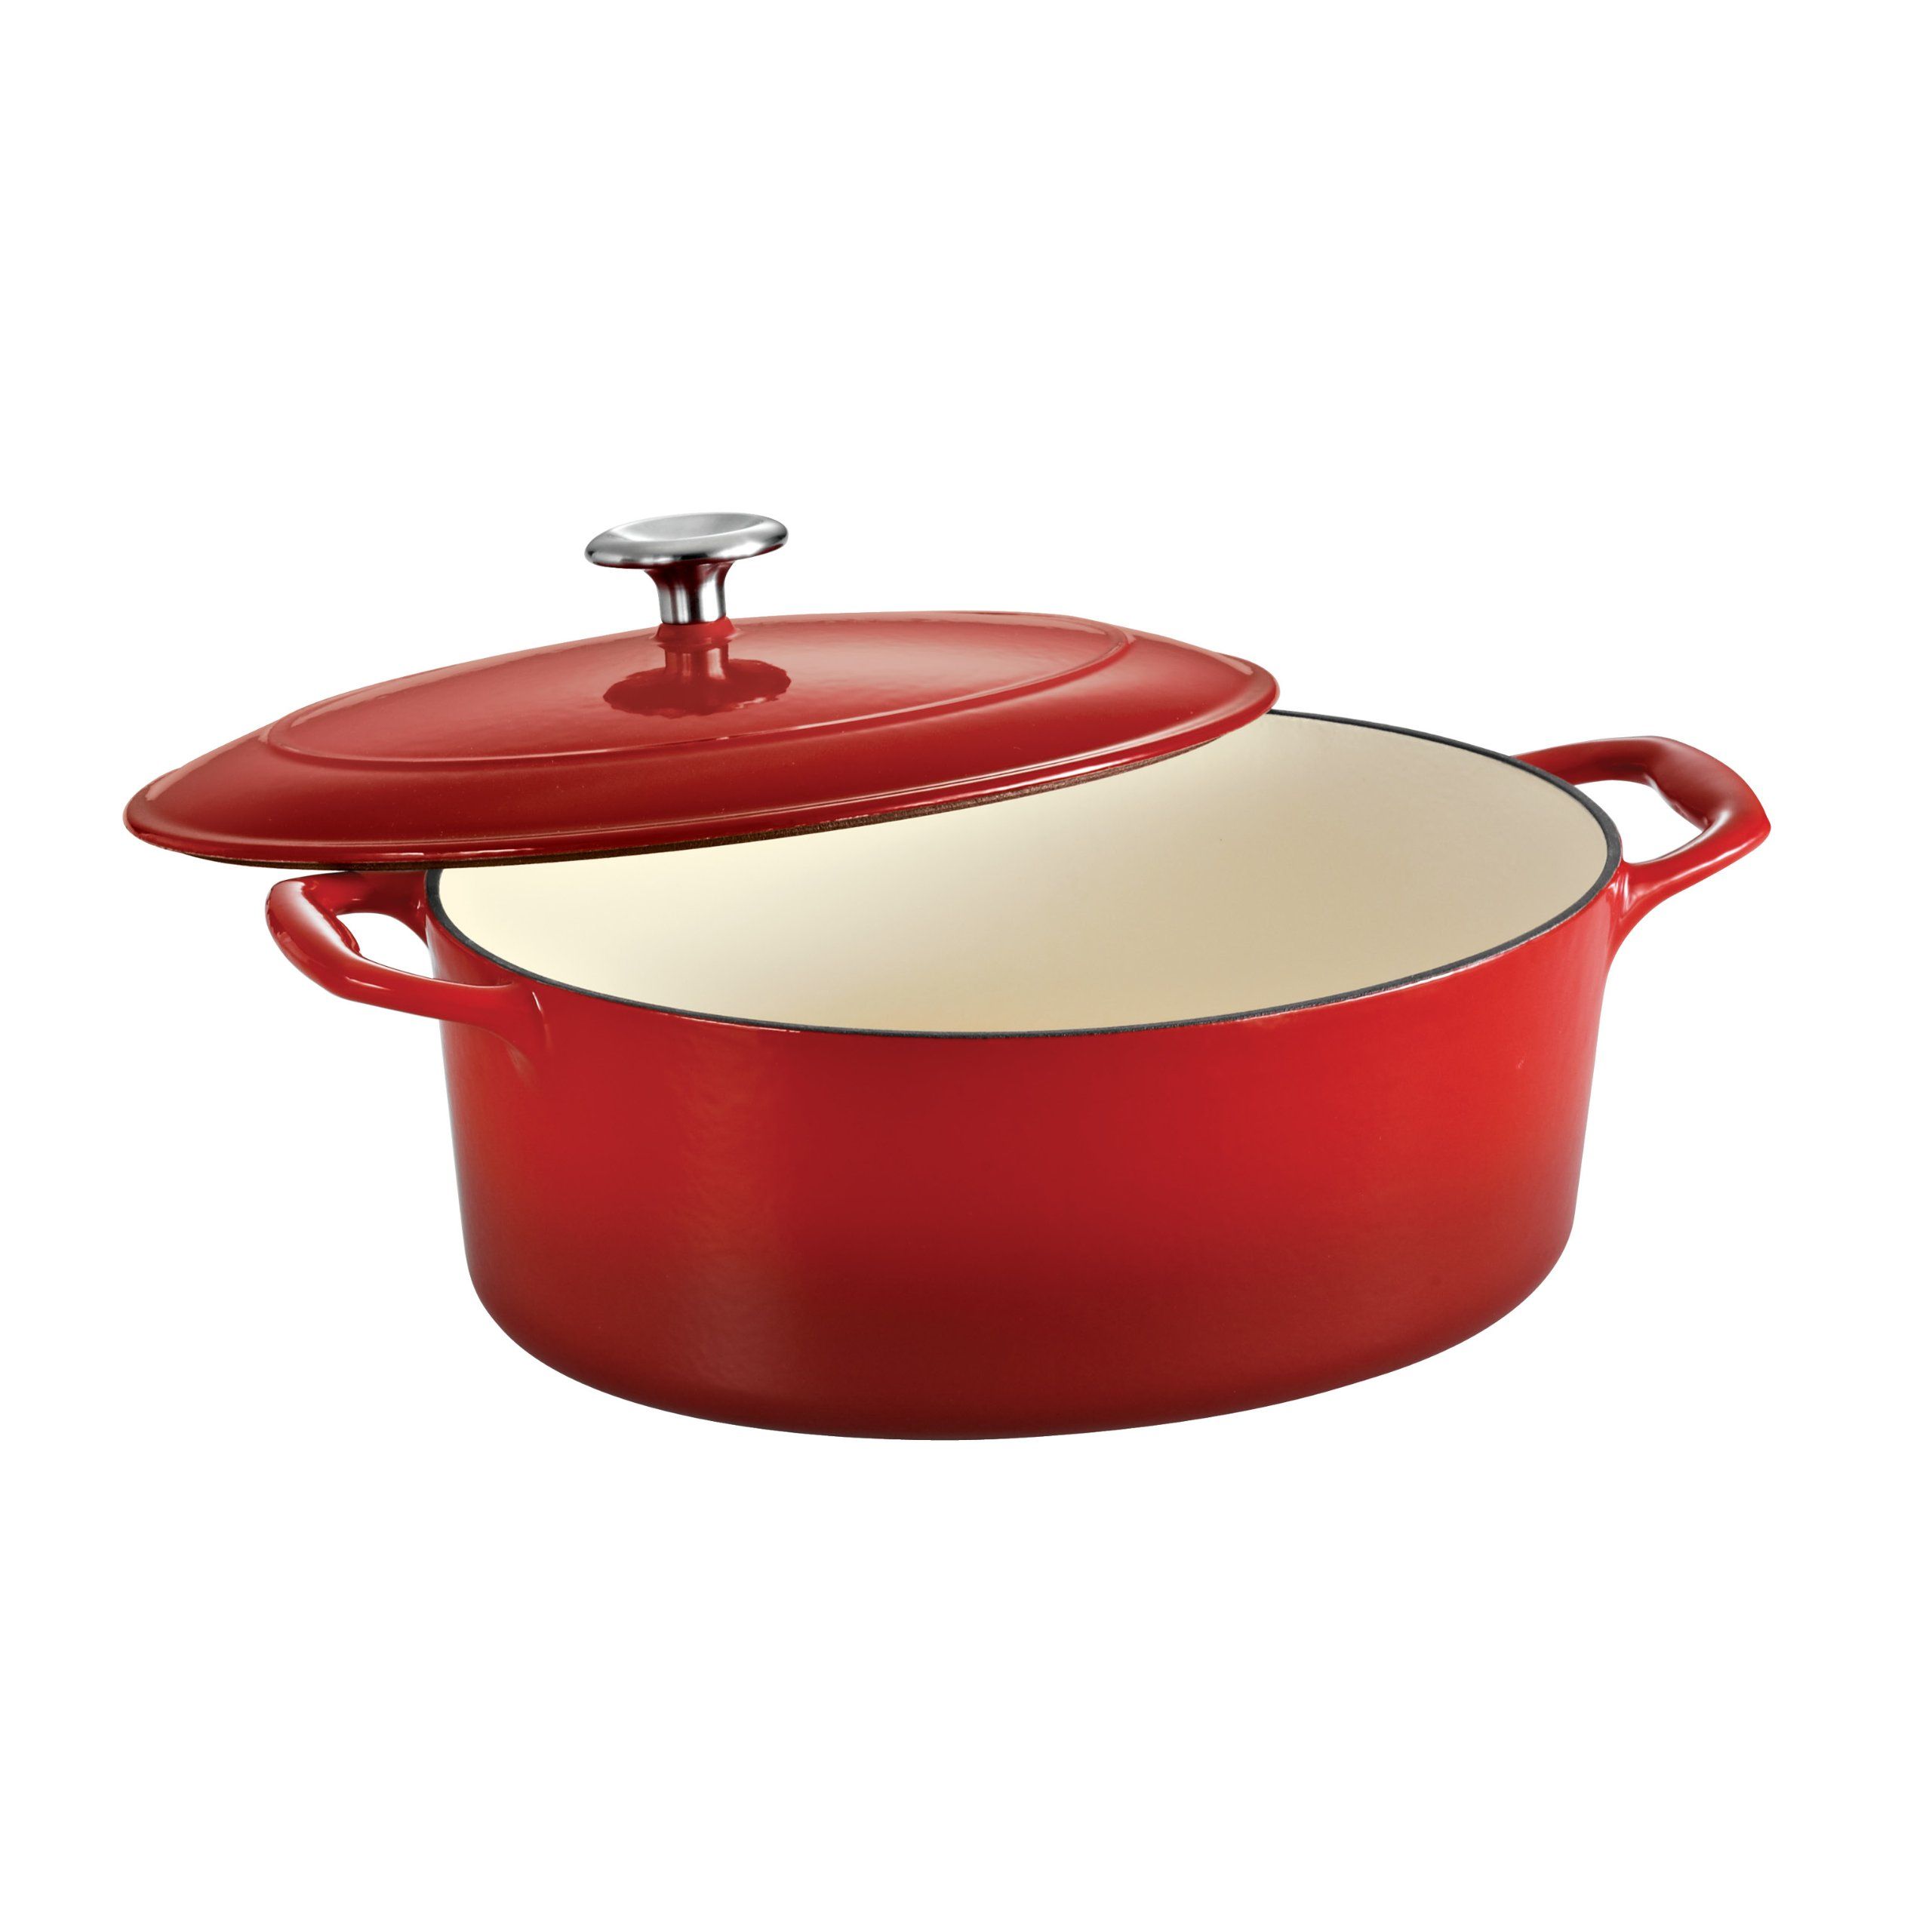 Tramontina Enameled Cast Iron Covered Dutch Oven 5.5-Quart Gradated Red, 80131/051DS | Amazon (US)